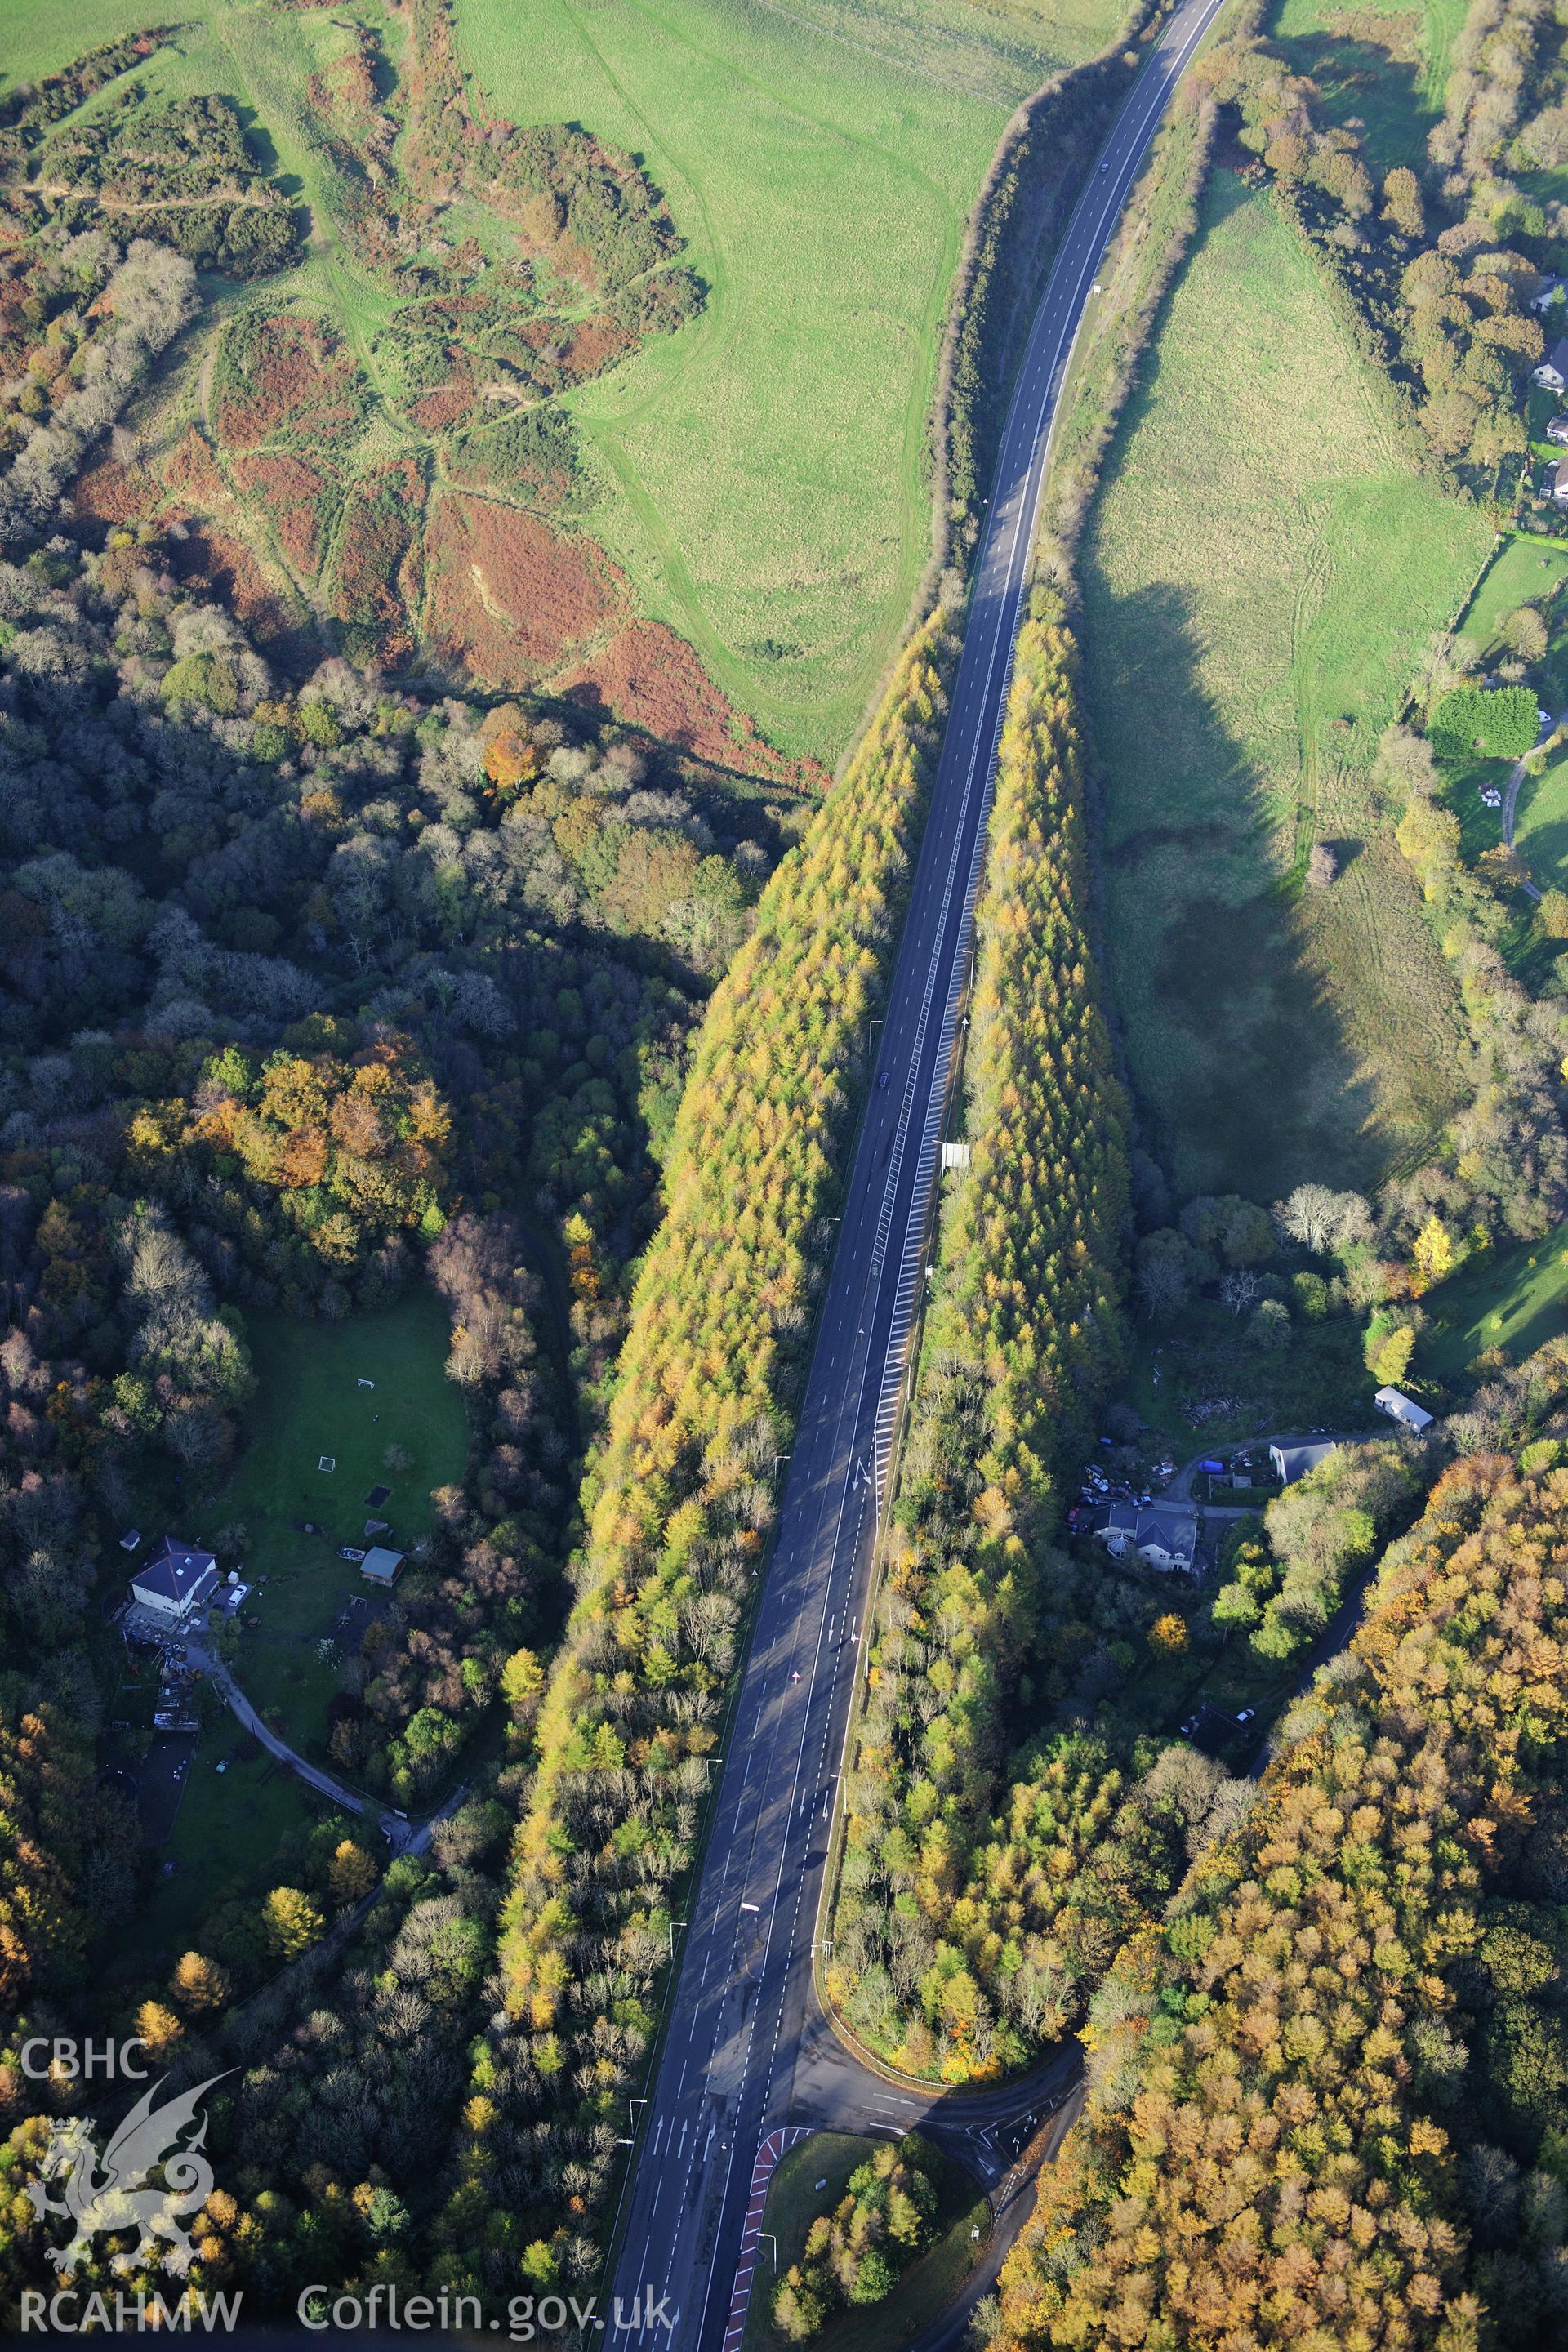 RCAHMW colour oblique photograph of Kilgetty Carriageway. Taken by Toby Driver on 26/10/2012.